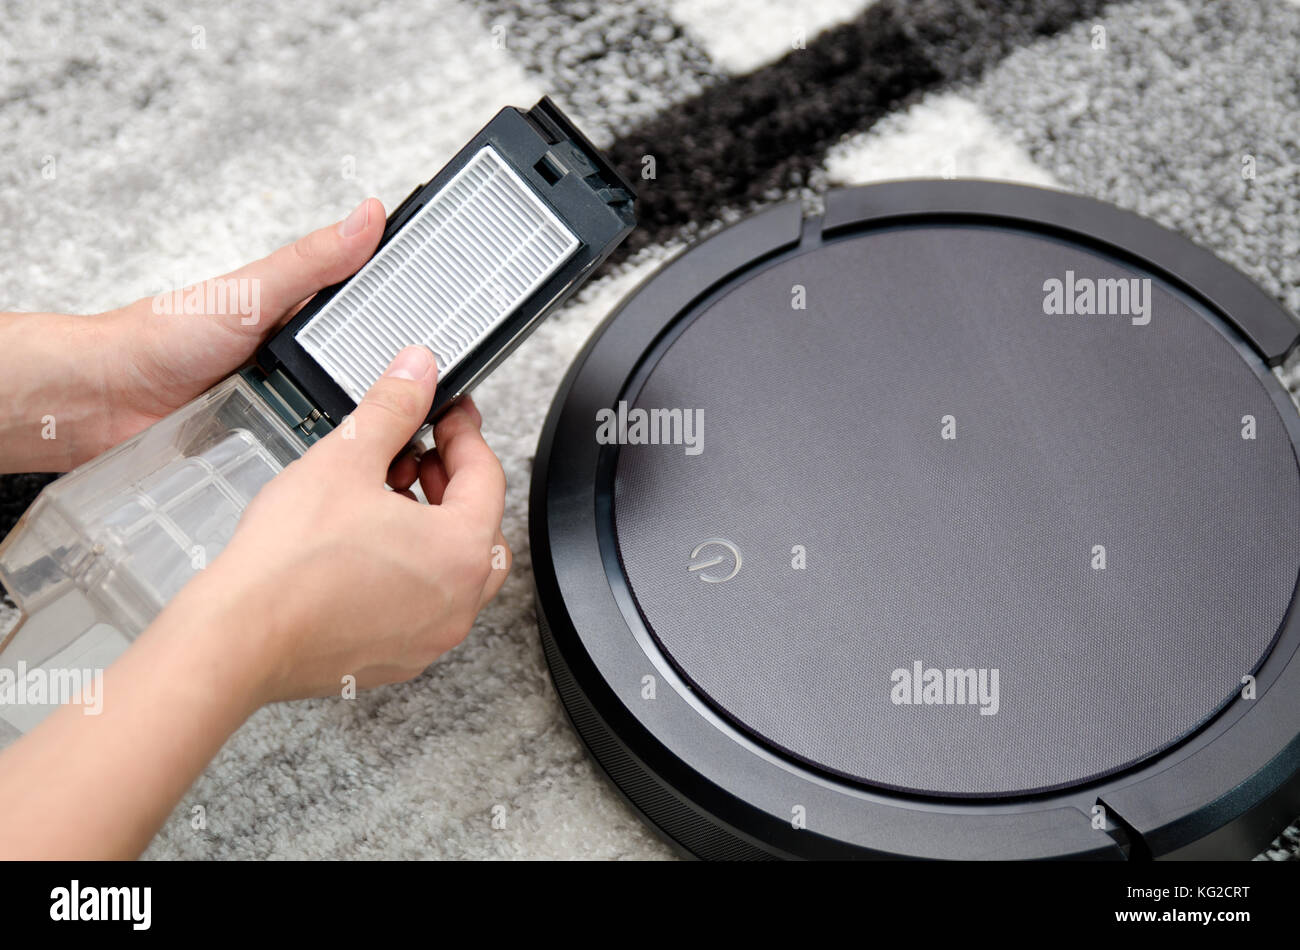 Robotic vacuum cleaner. Hepa filter cleaning. Maintenance concept. Stock Photo